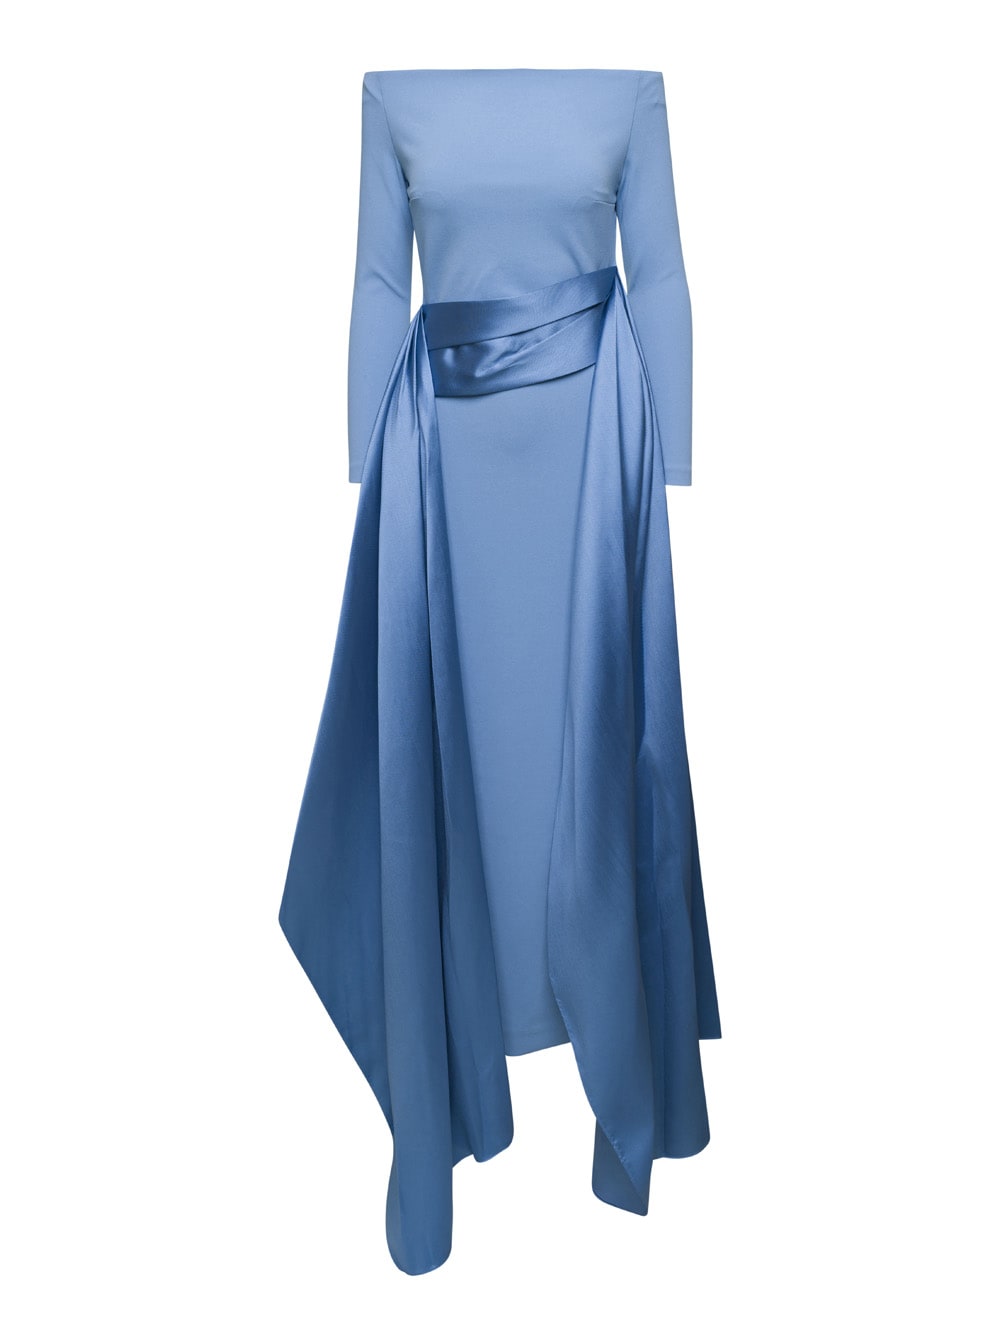 SOLACE LONDON LIGHT BLUE LONG DRESS WITH TRAIN IN TECHNO FABRIC STRETCH WOMAN